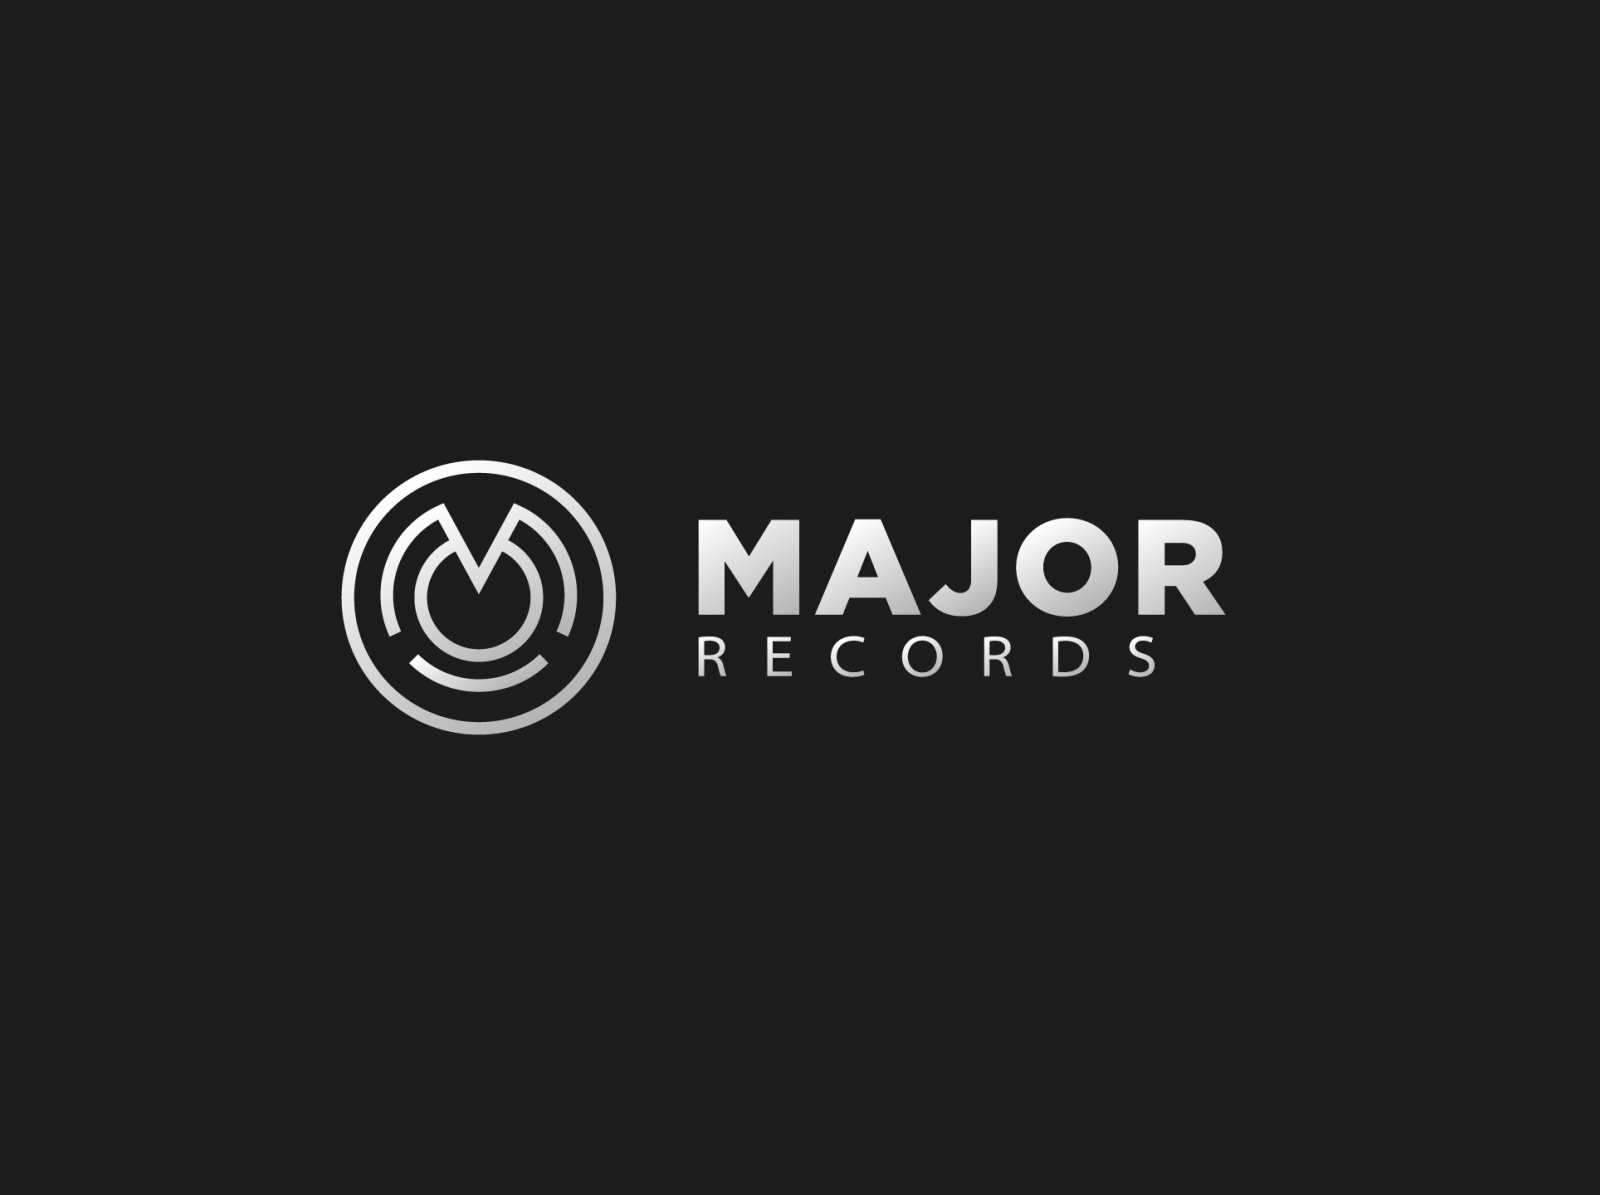 Major Records by Loner Graphics on Dribbble